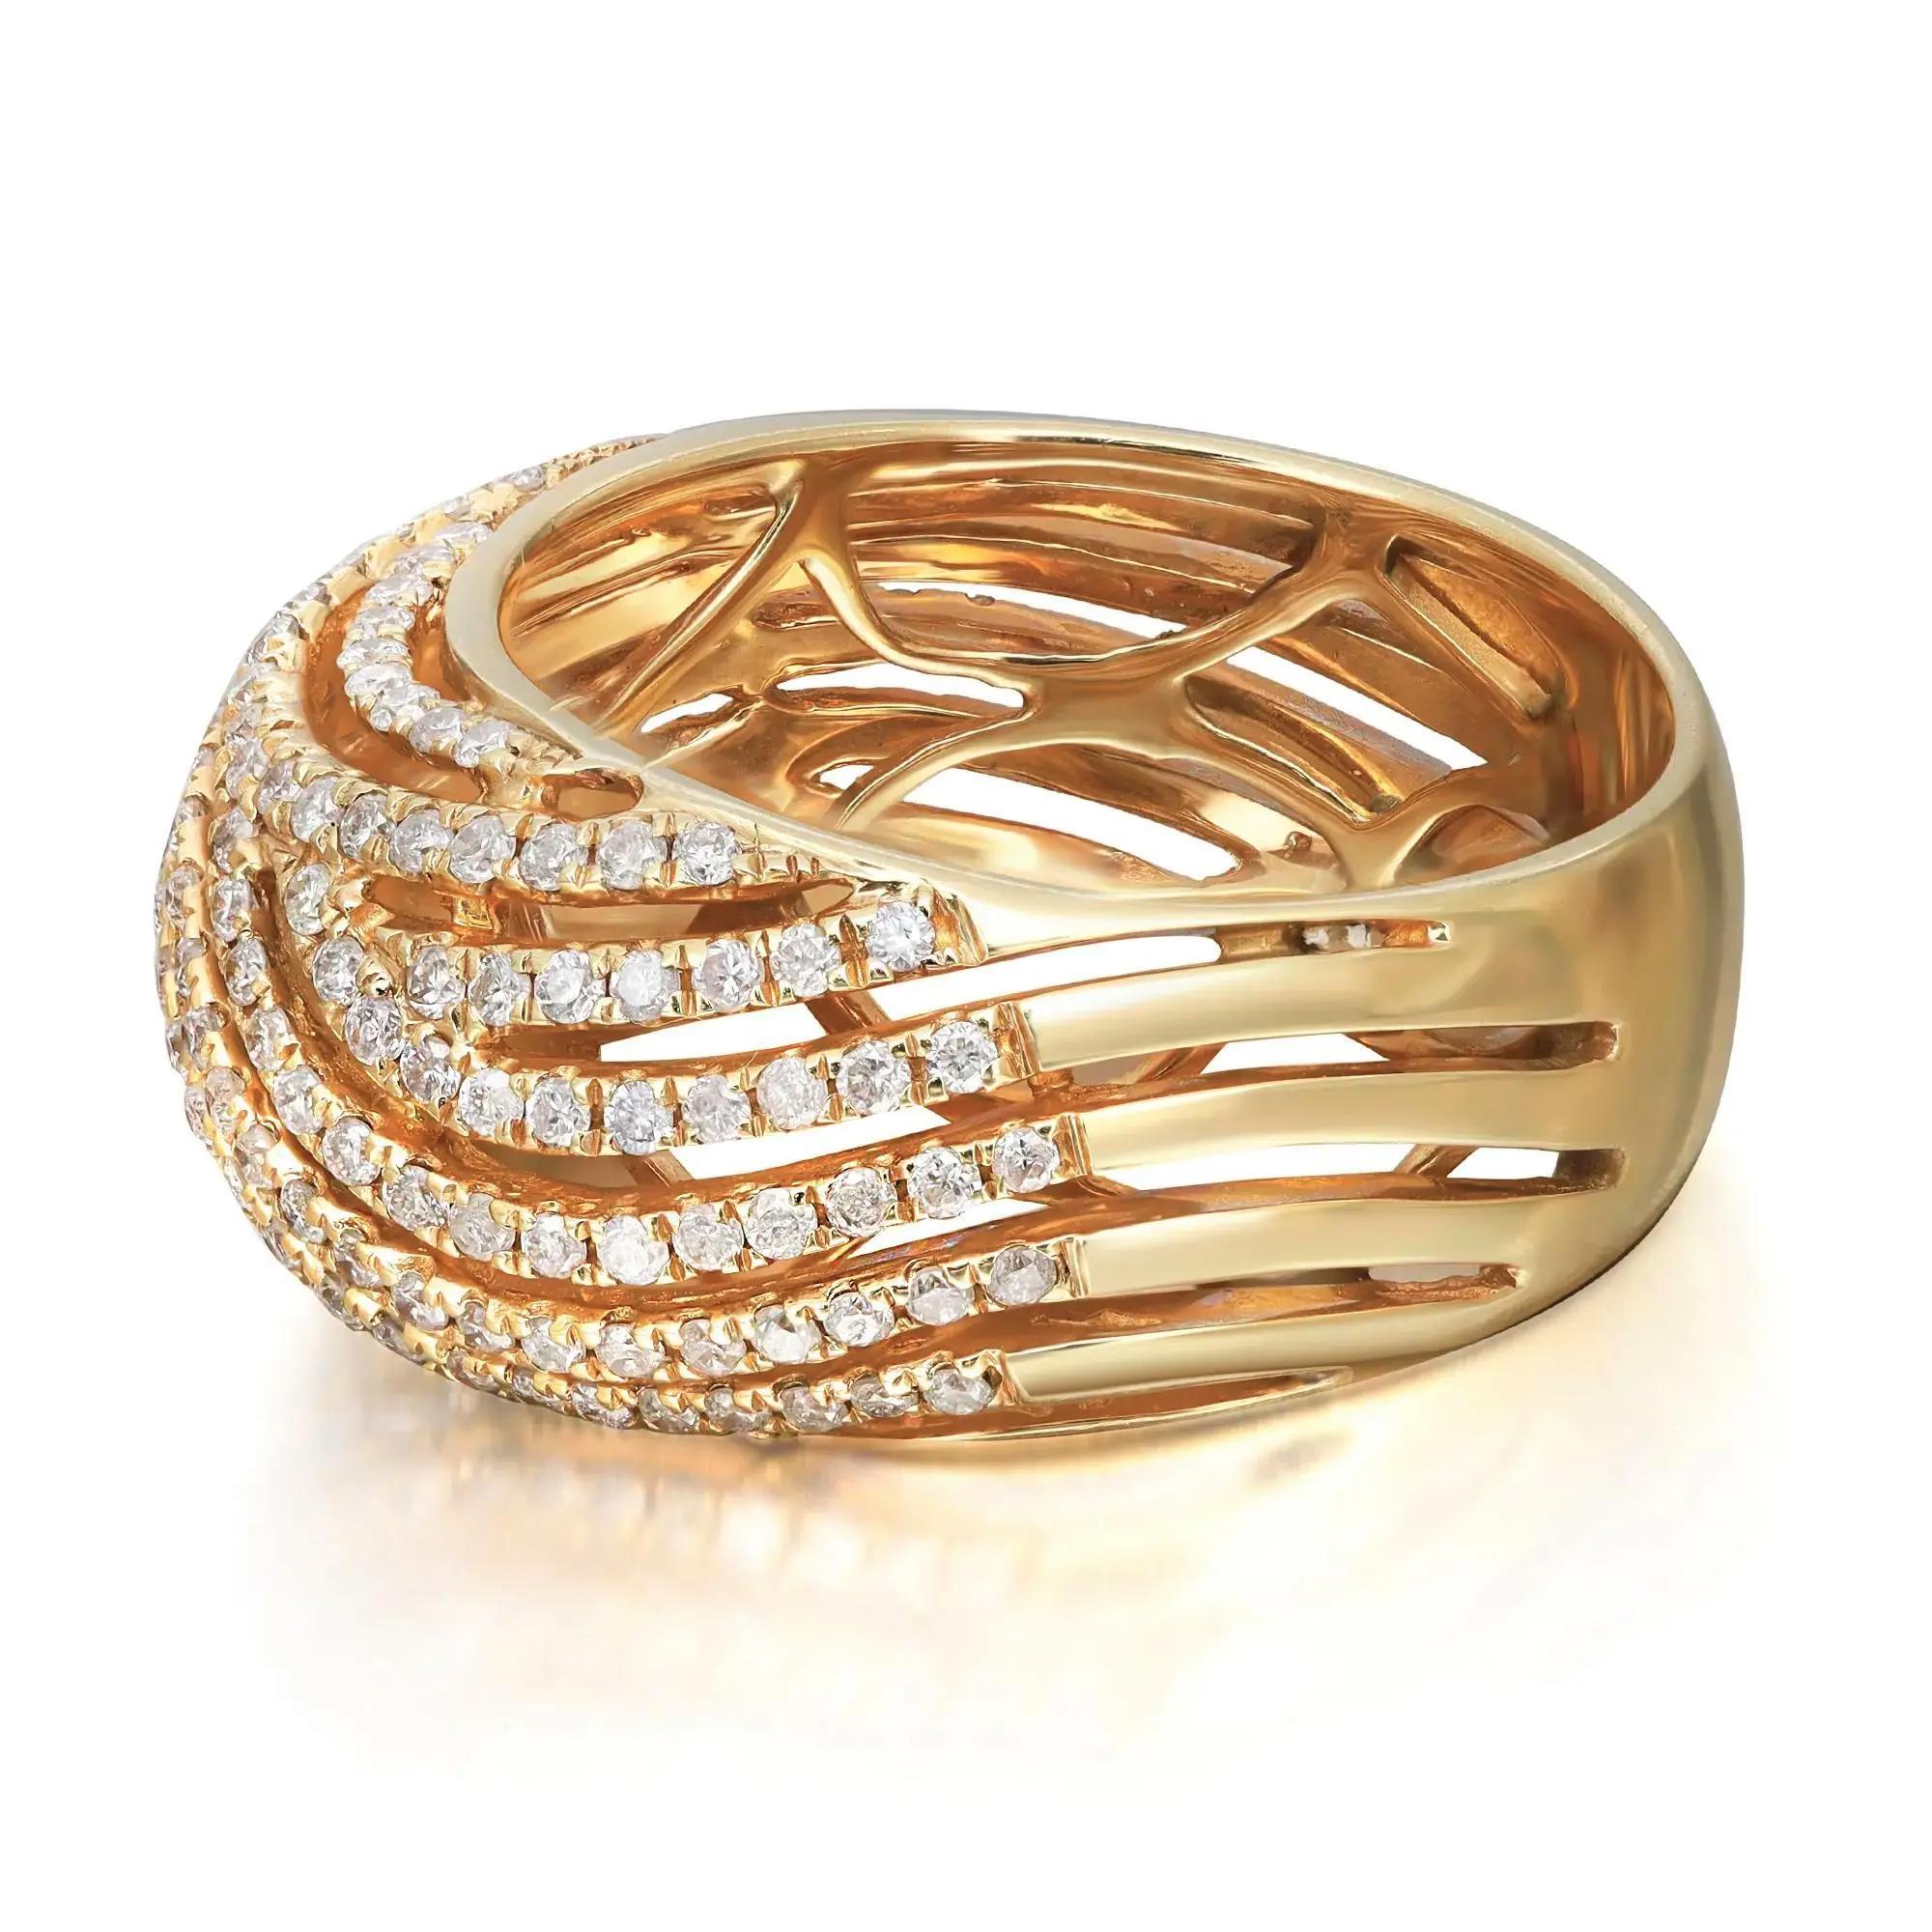 1.07cttw Prong Set Round Cut Diamond Ladies Cocktail Ring 14k Yellow Gold In New Condition For Sale In New York, NY